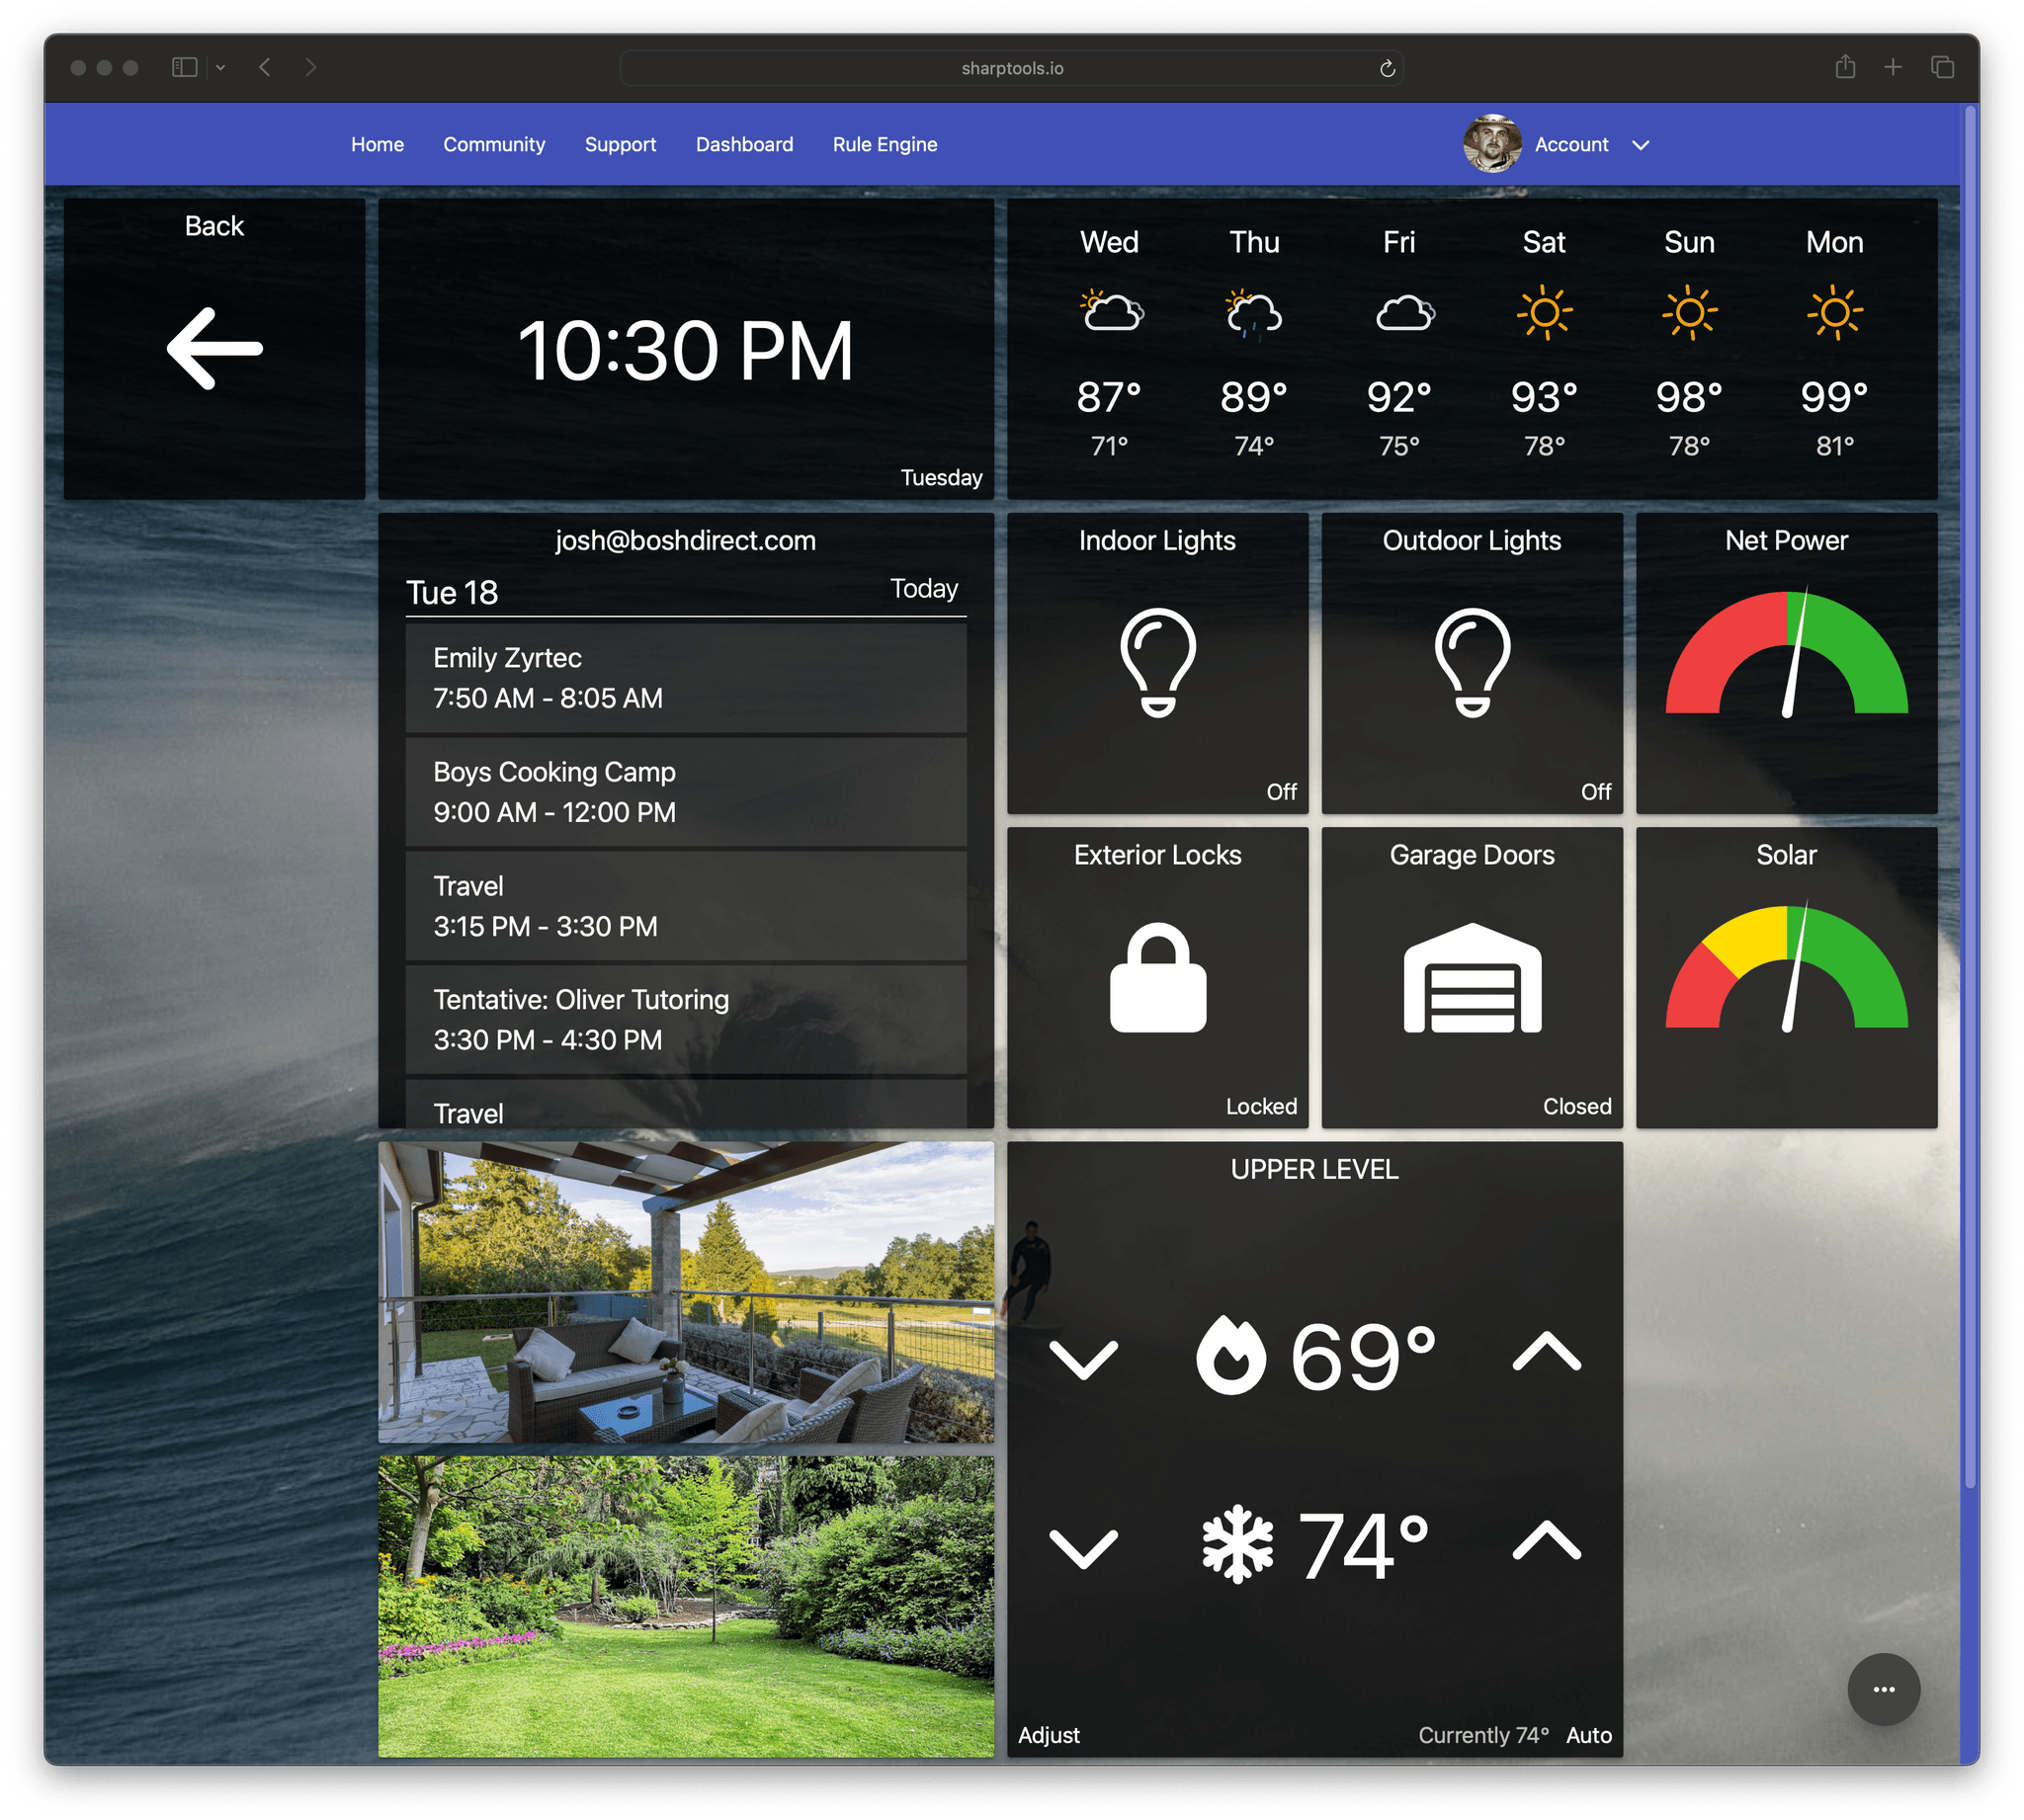 SharpTools Dashboards with Gauges, Smart Devices, Cameras, Calendars, Weather, and More